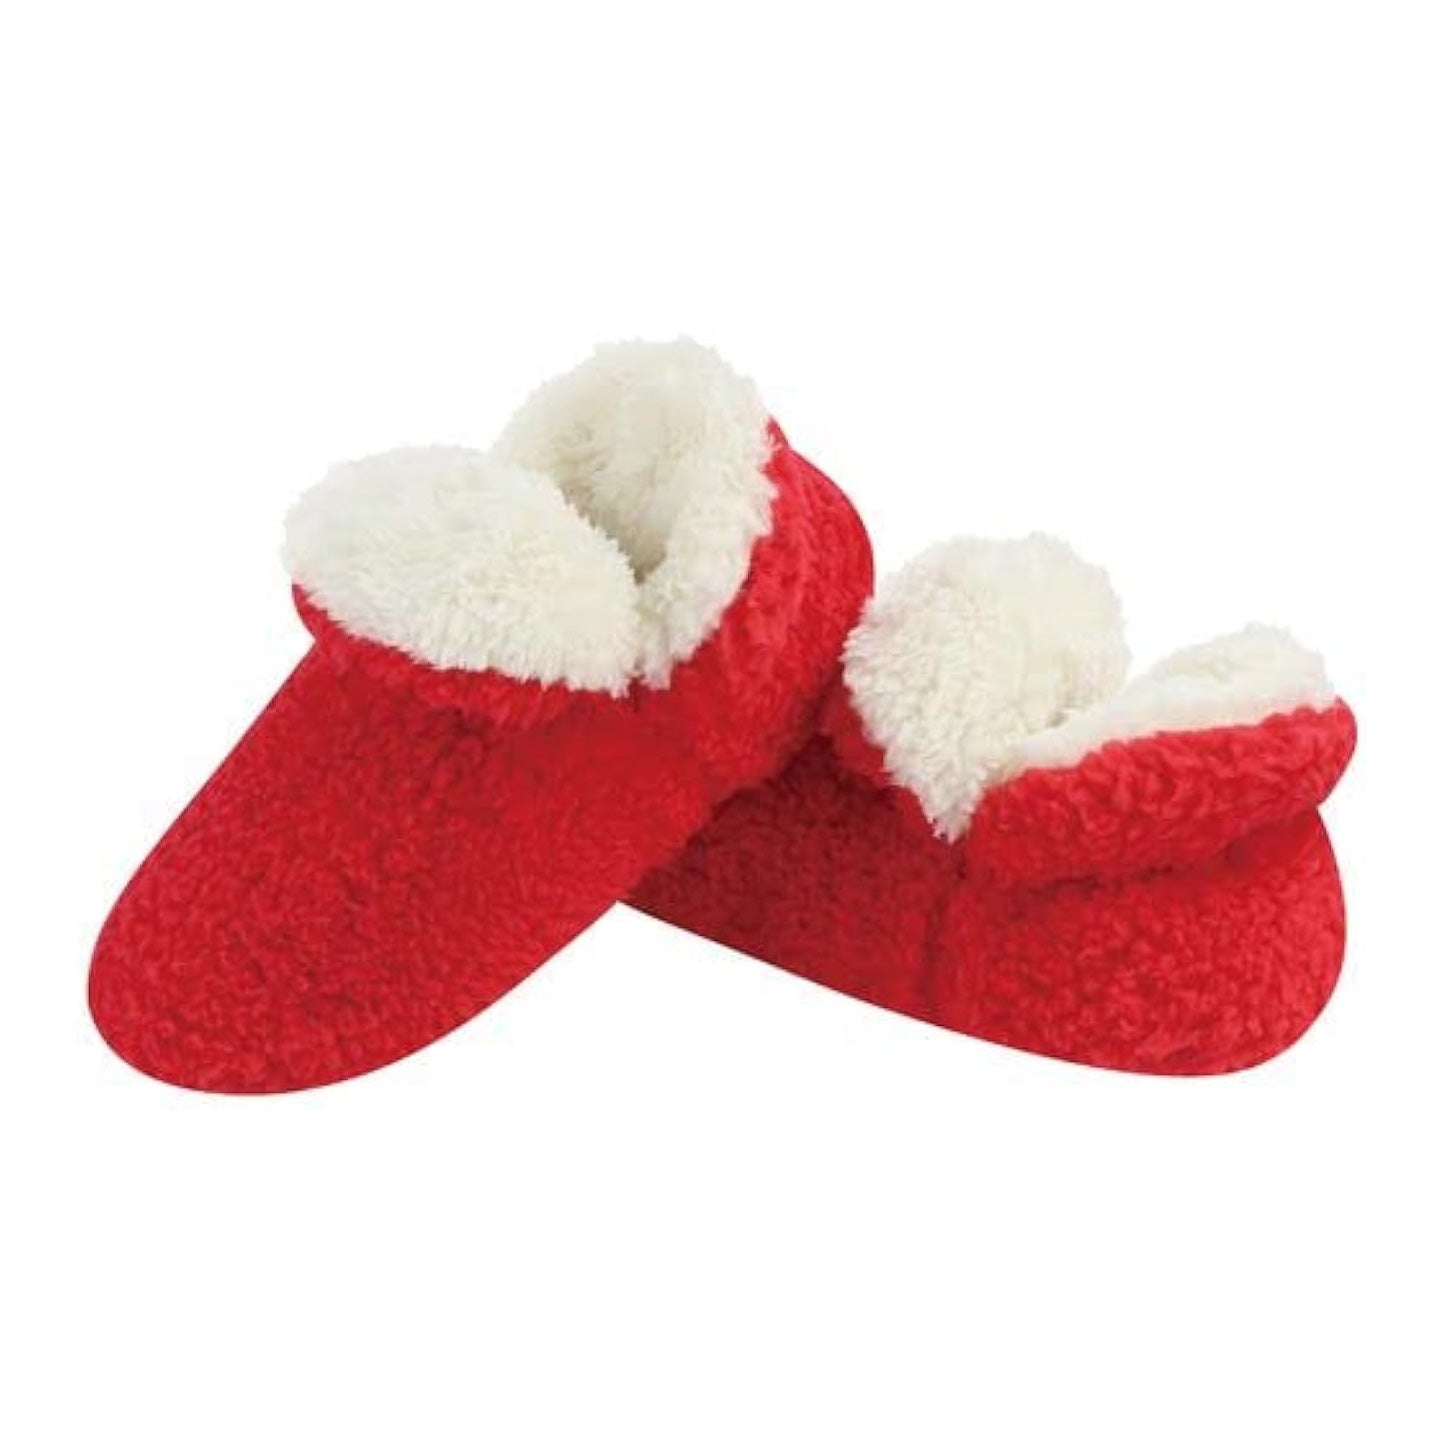 Jack and Jill Bootie Slippers